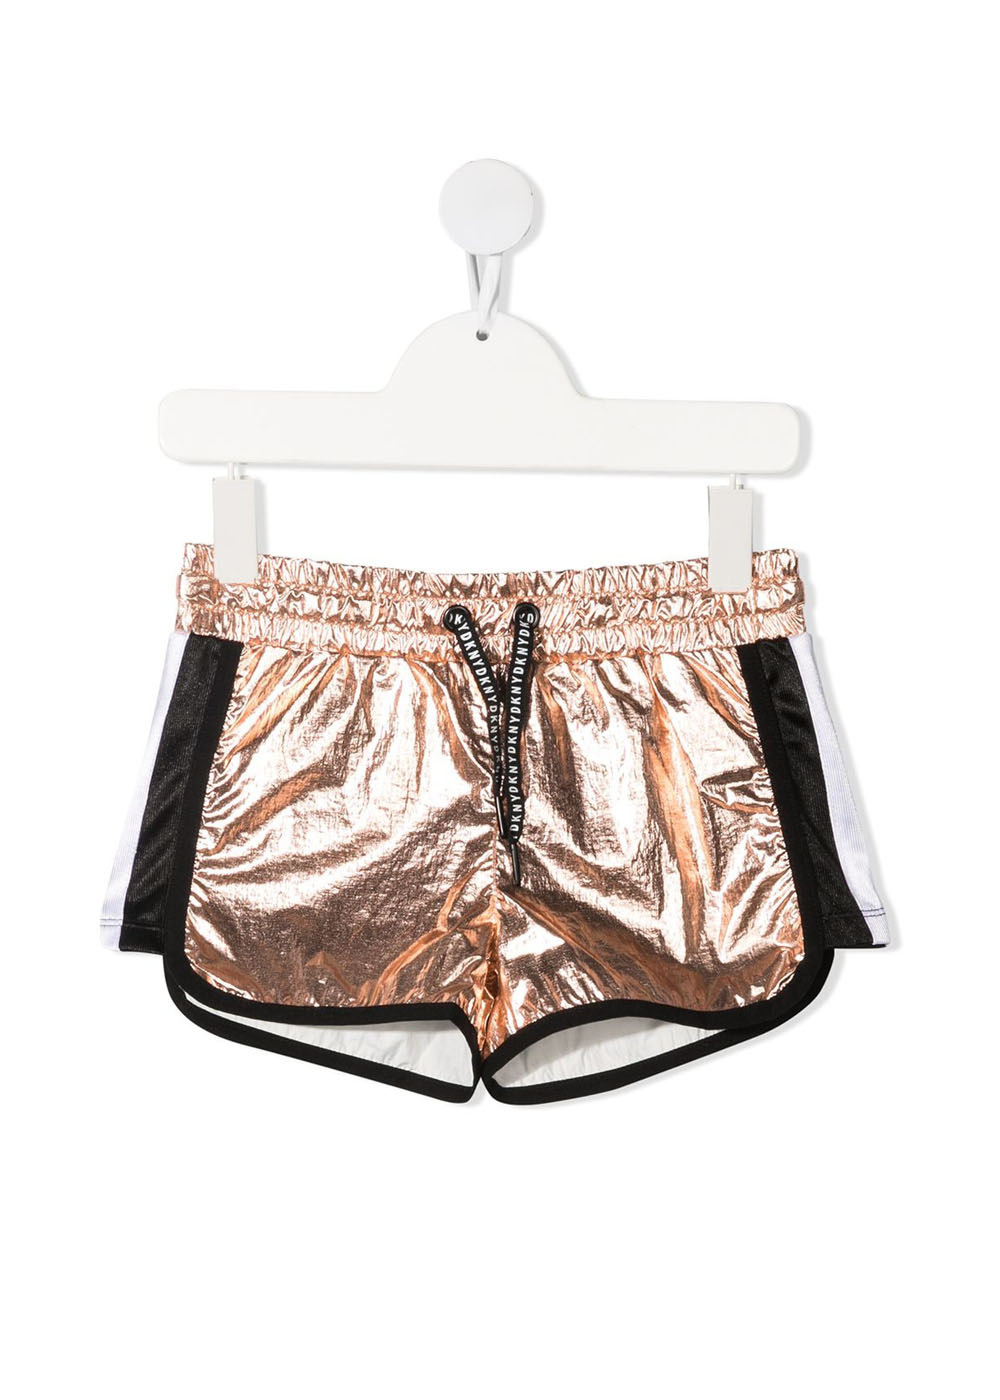 Featured image for “DKNY SHORTS METALLIZZATO”